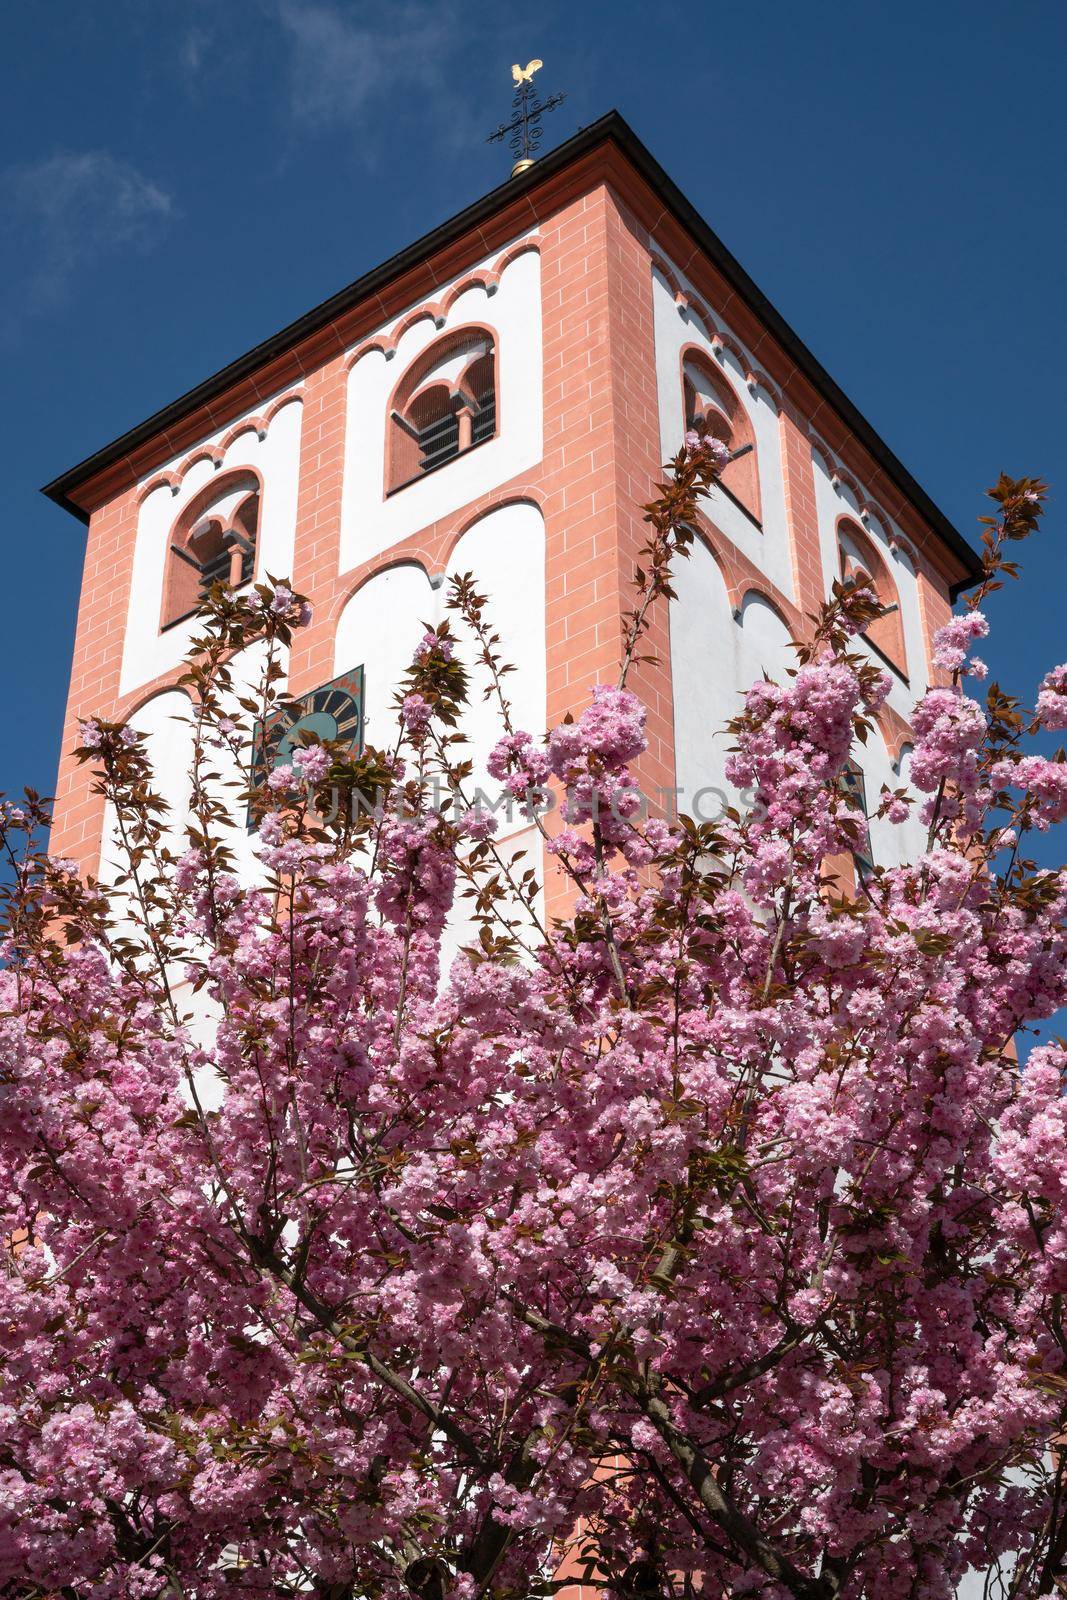 Old parish church of village Odenthal with blossoming trees at springtime, Bergisches Land, Germany